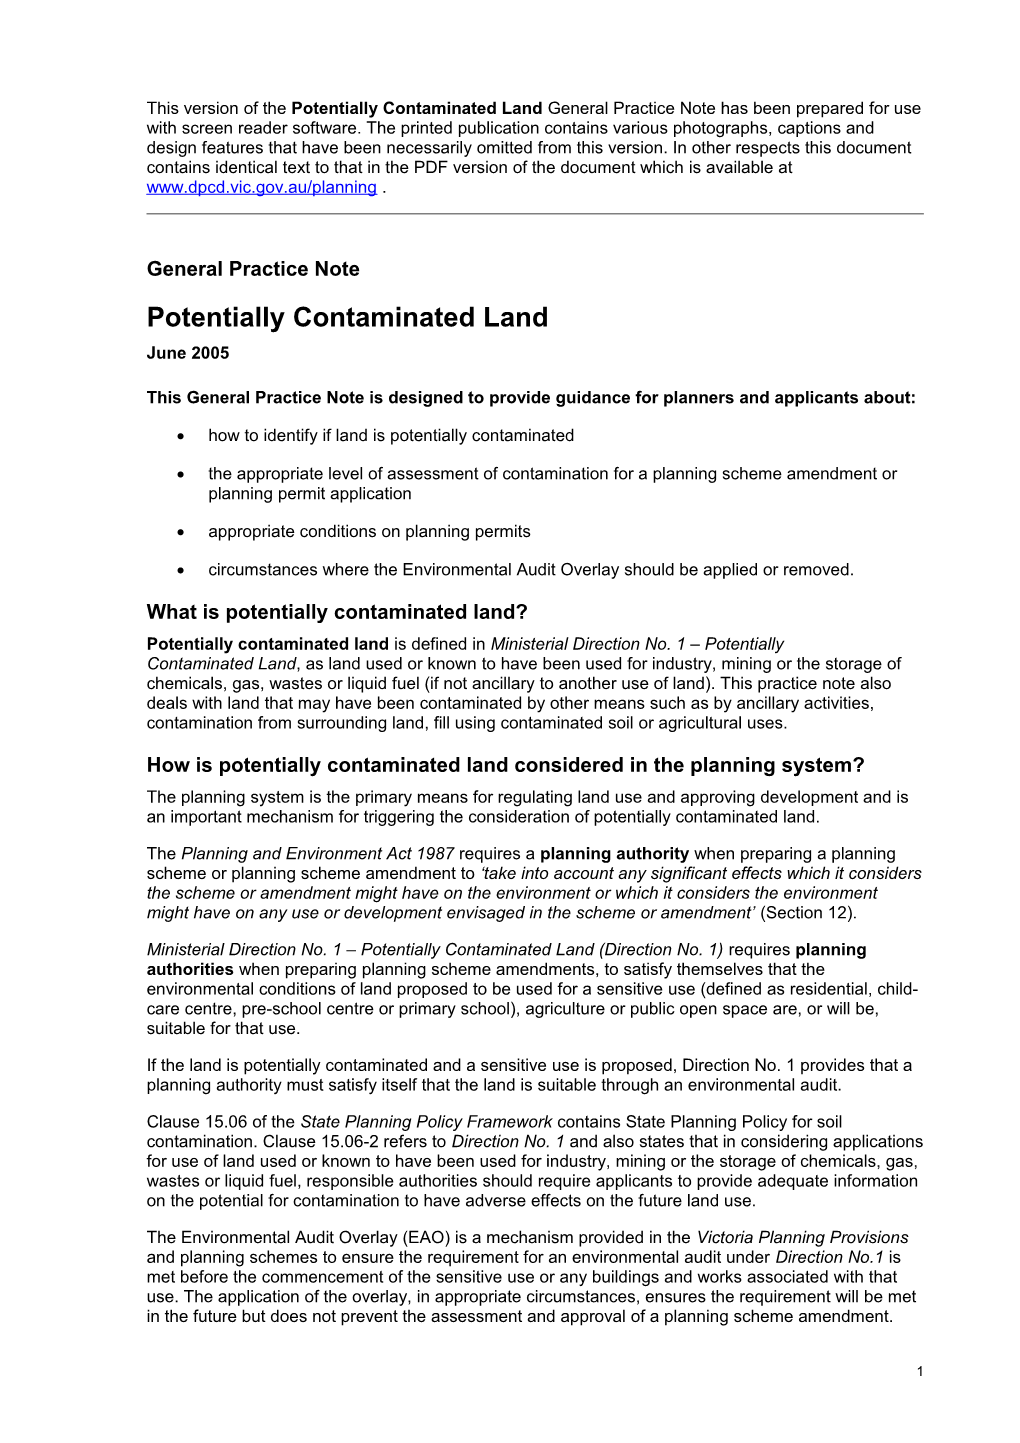 Planning Practice Note 30: Potentially Contaminated Land